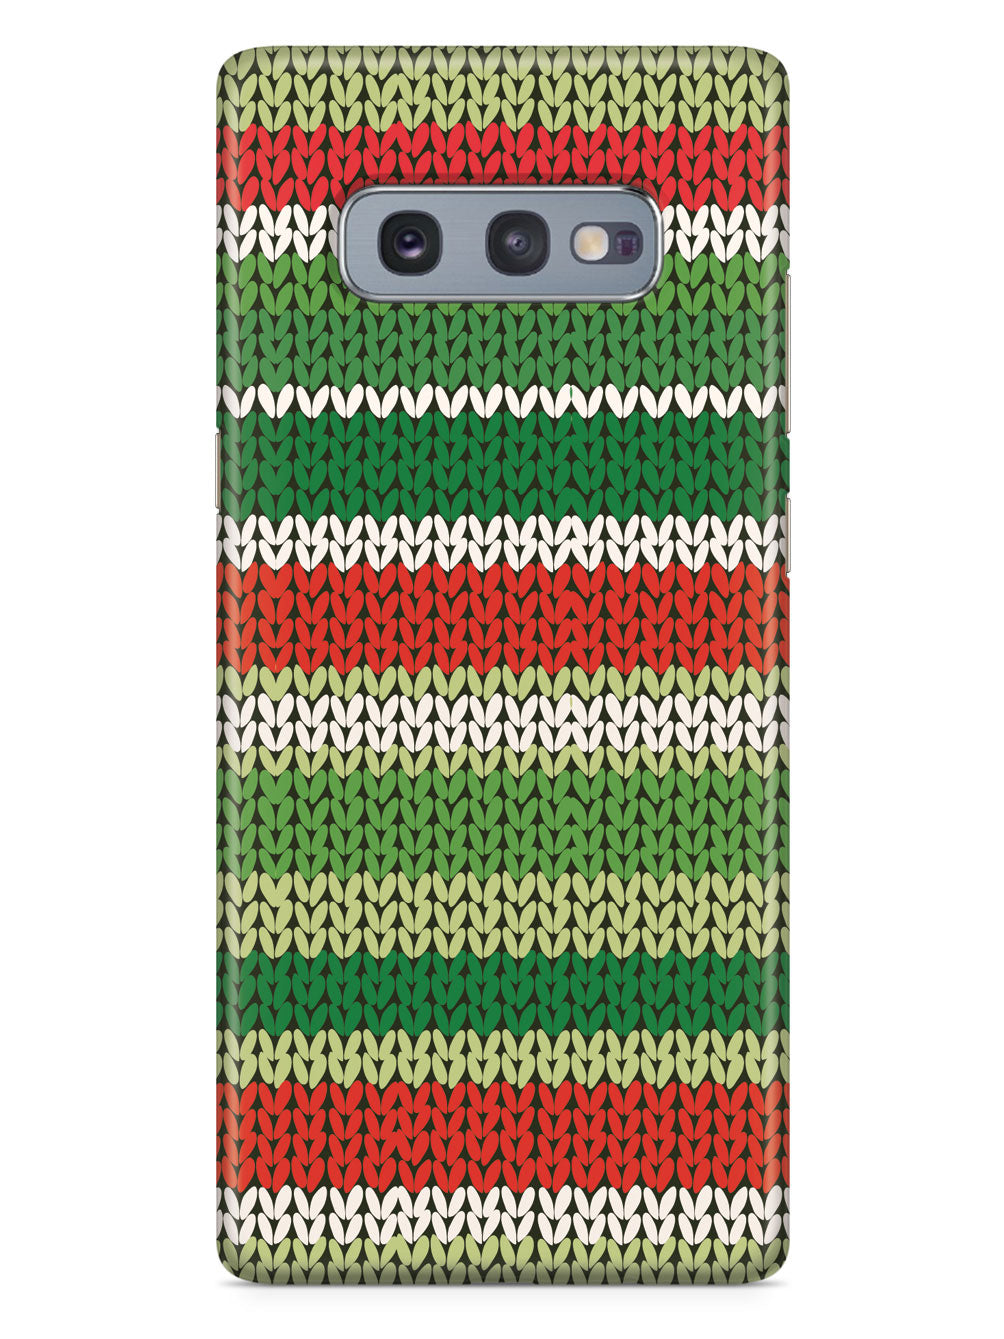 Red and Green Sweater Texture - Black Case